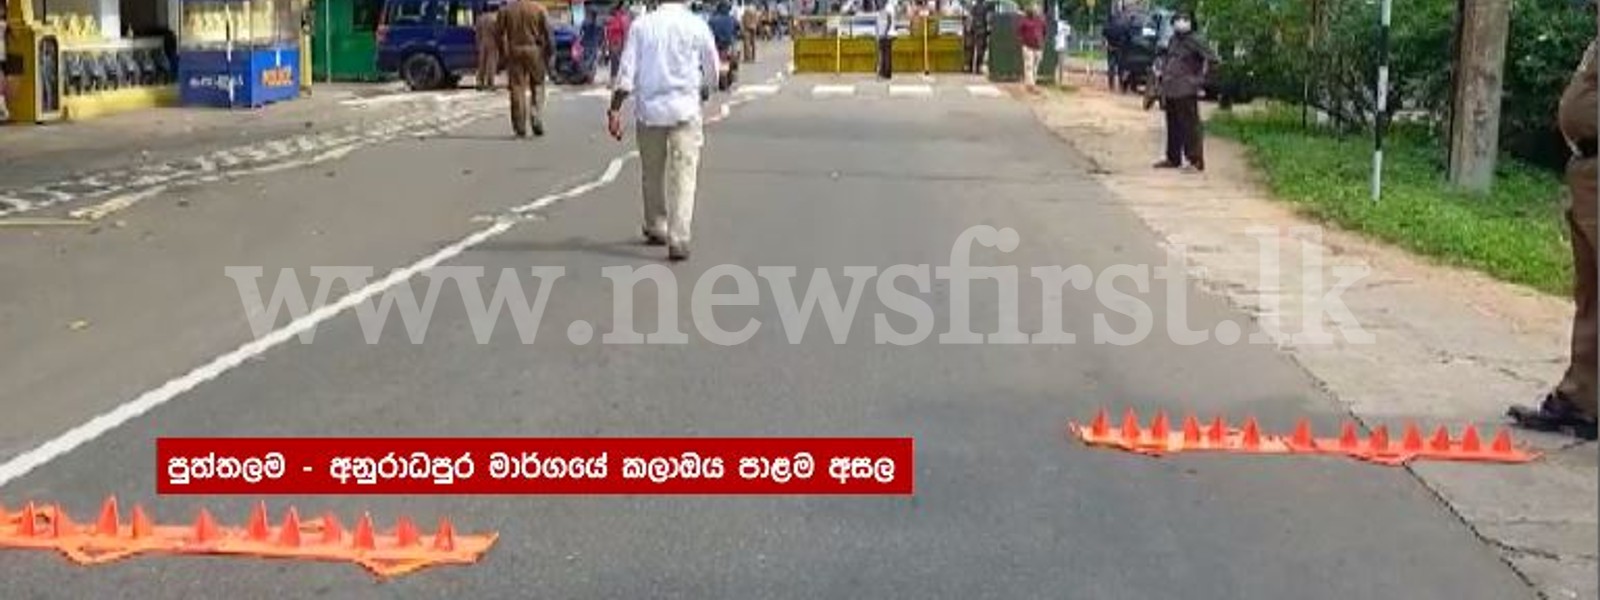 SJB Protest: Police use Spike Strips to prevent buses from entering Colombo